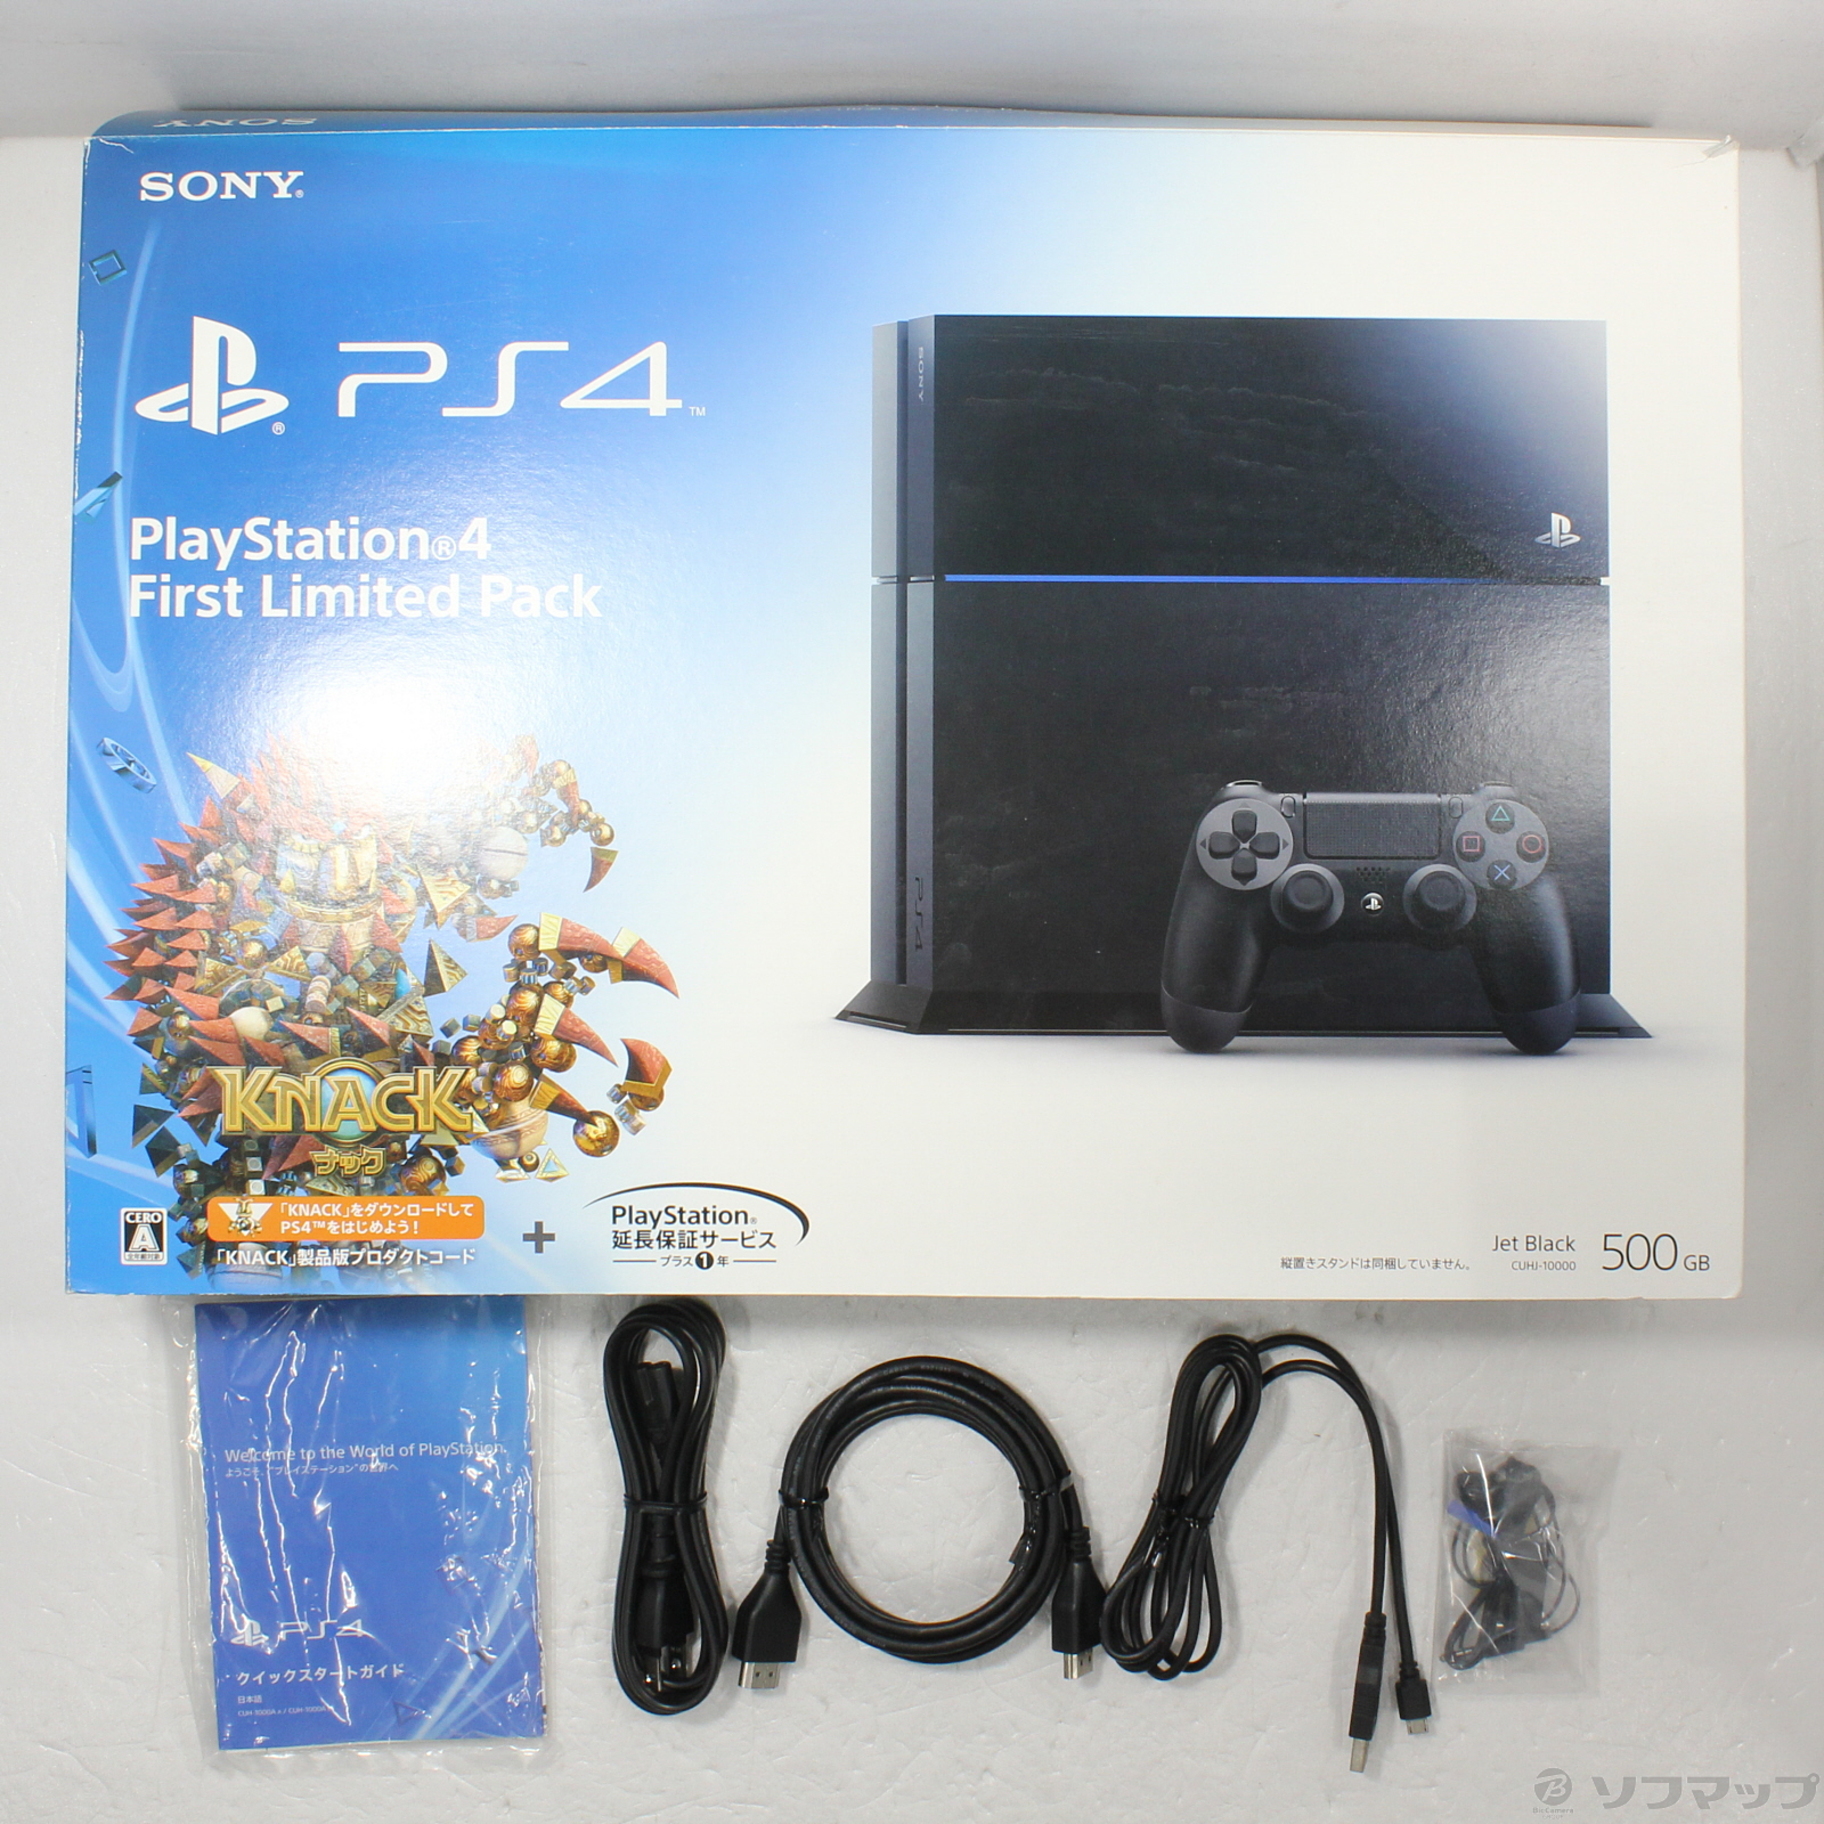 PlayStation4 First Limited Pack　カメラ付き